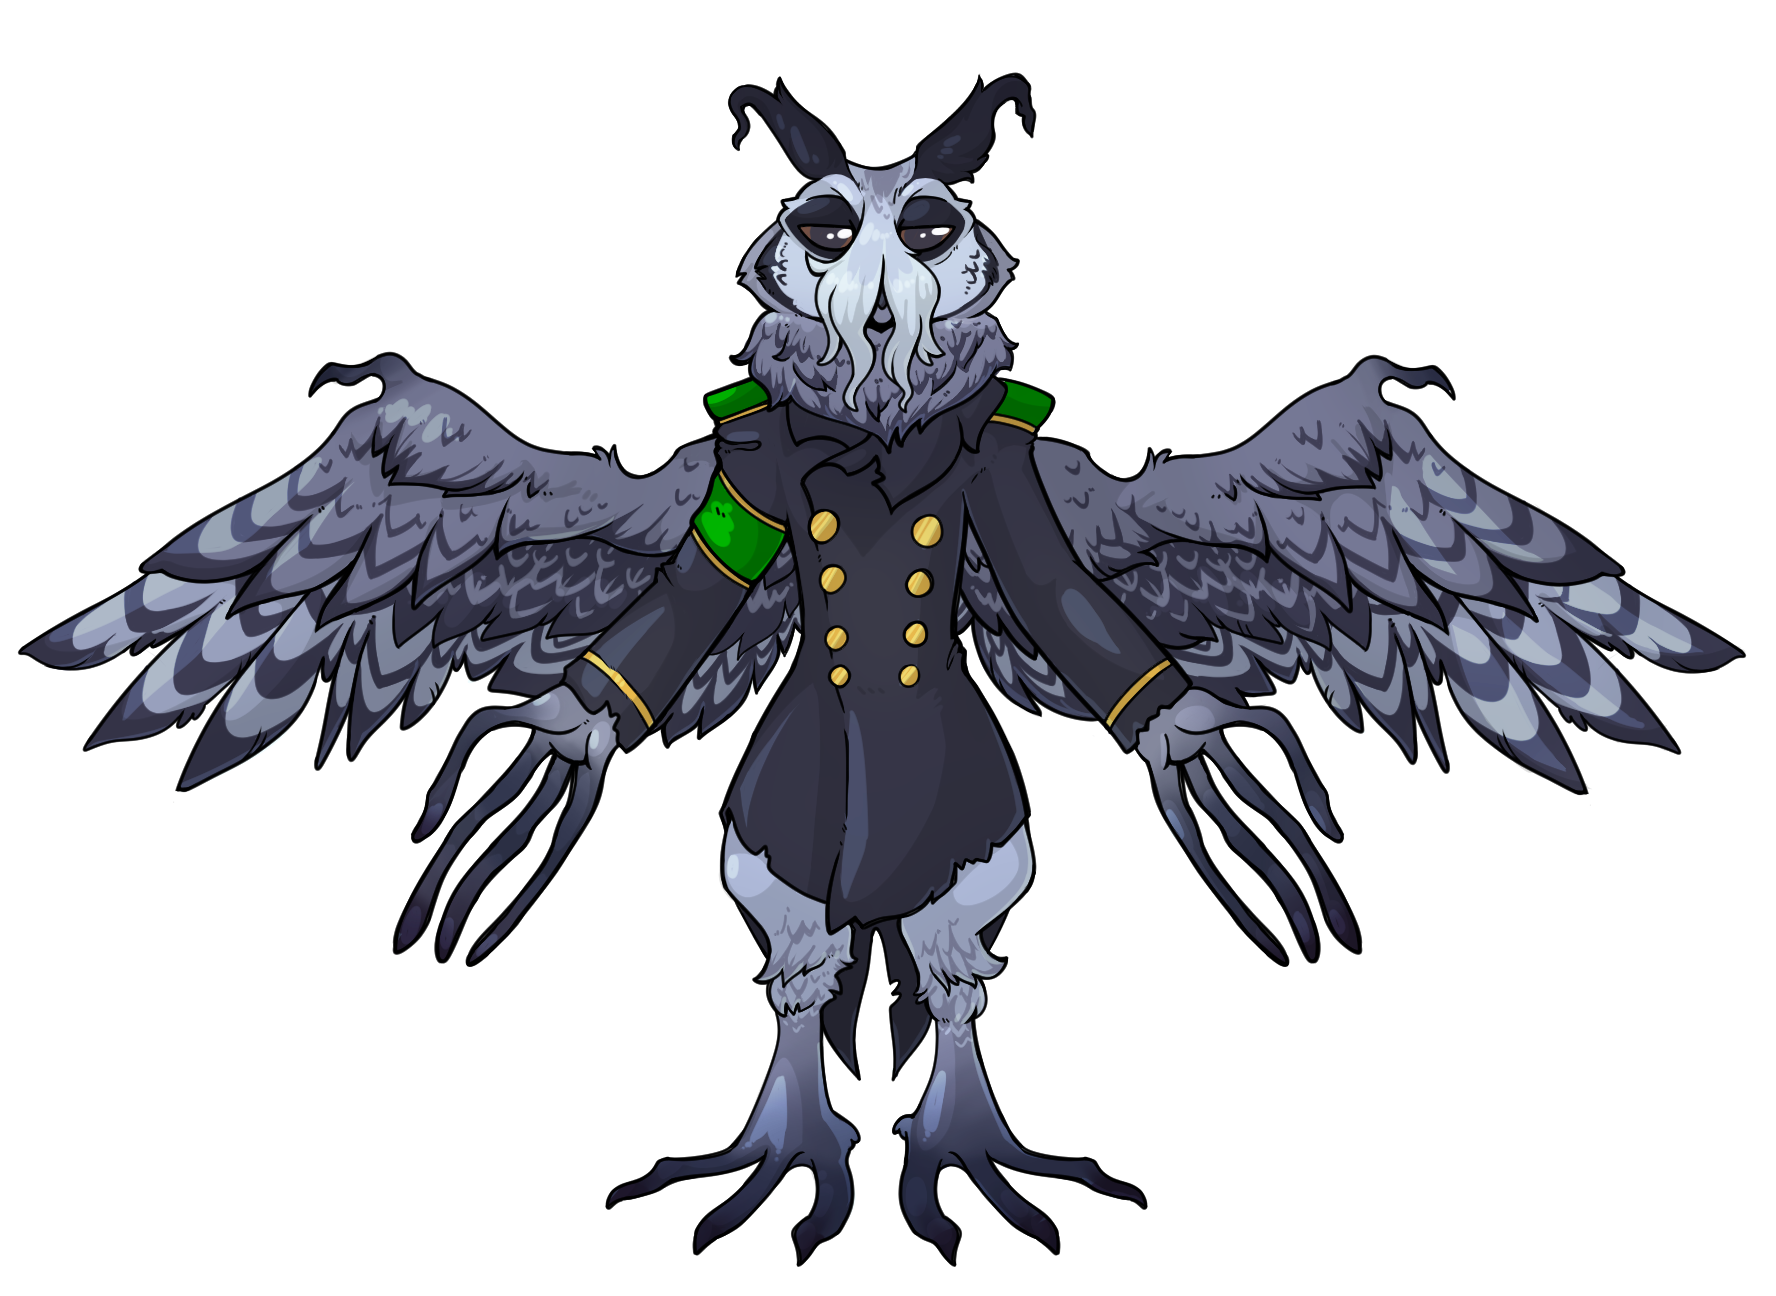 Owlin (humanoid owl) wearing a WW1-era trench coat. The owl is dark, with dark grey feathers and a darker grey pattern. His arms and feet ends in long, thin tentacles.